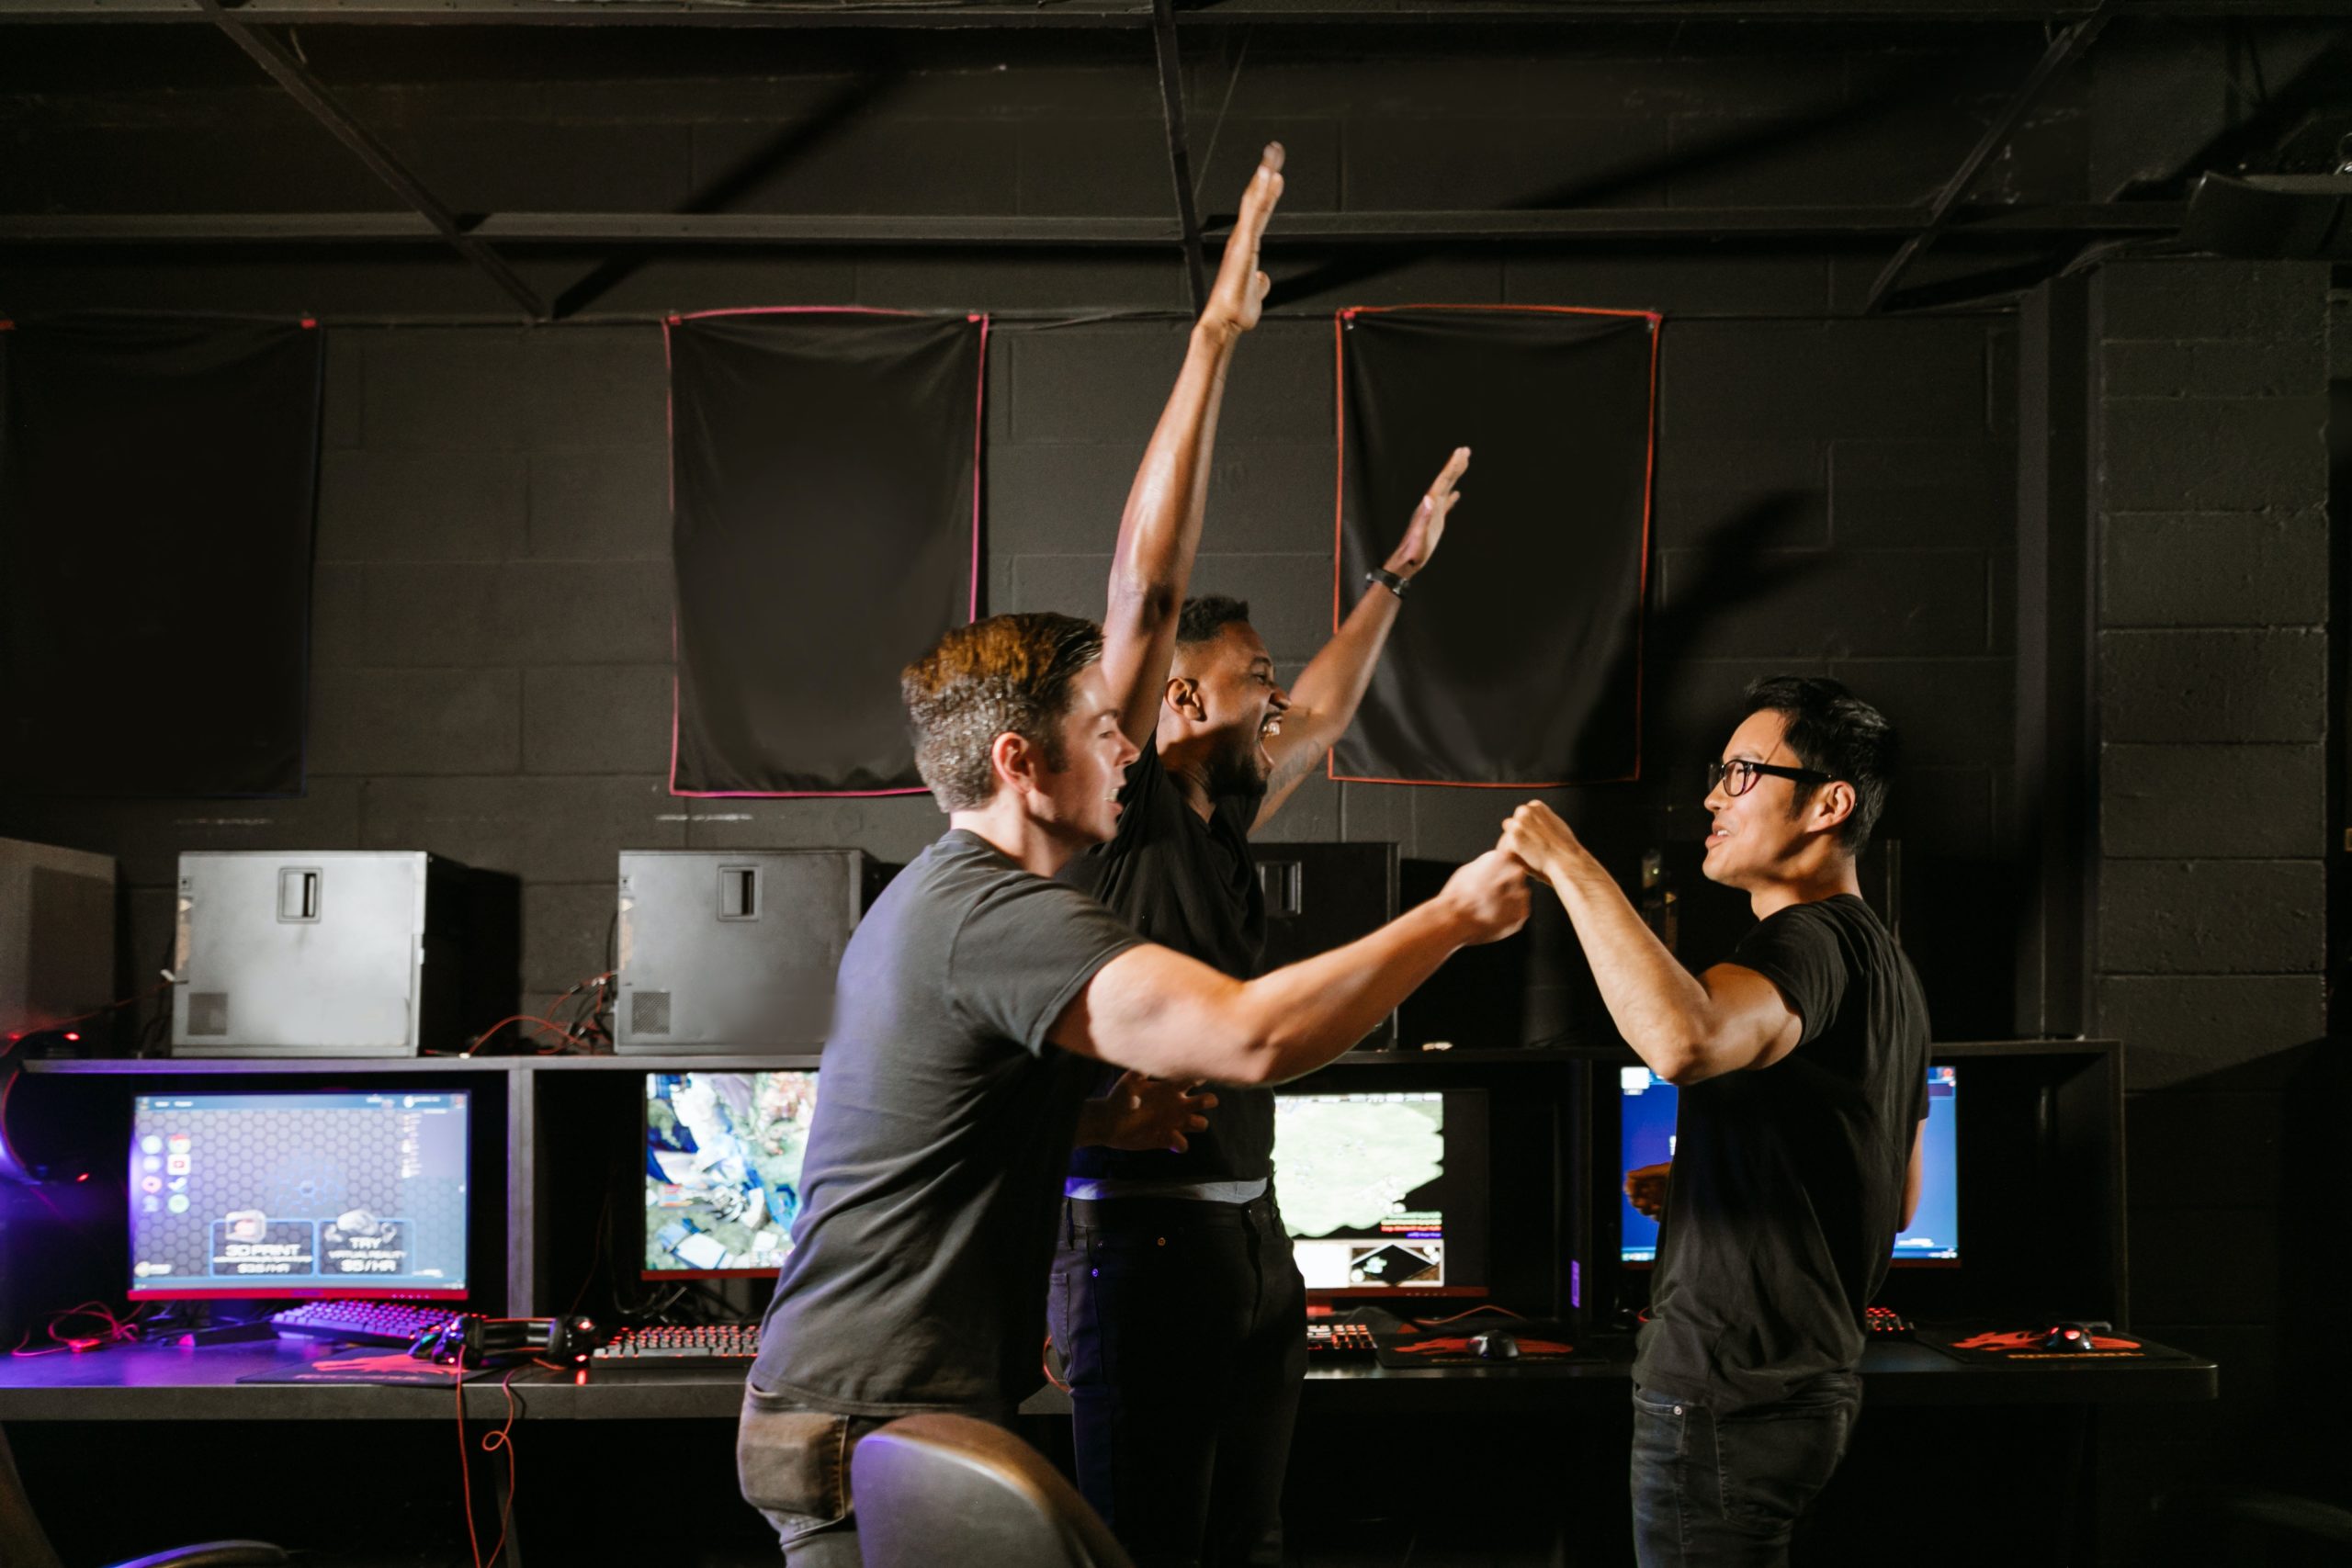 Video Games are effective for Team-Building